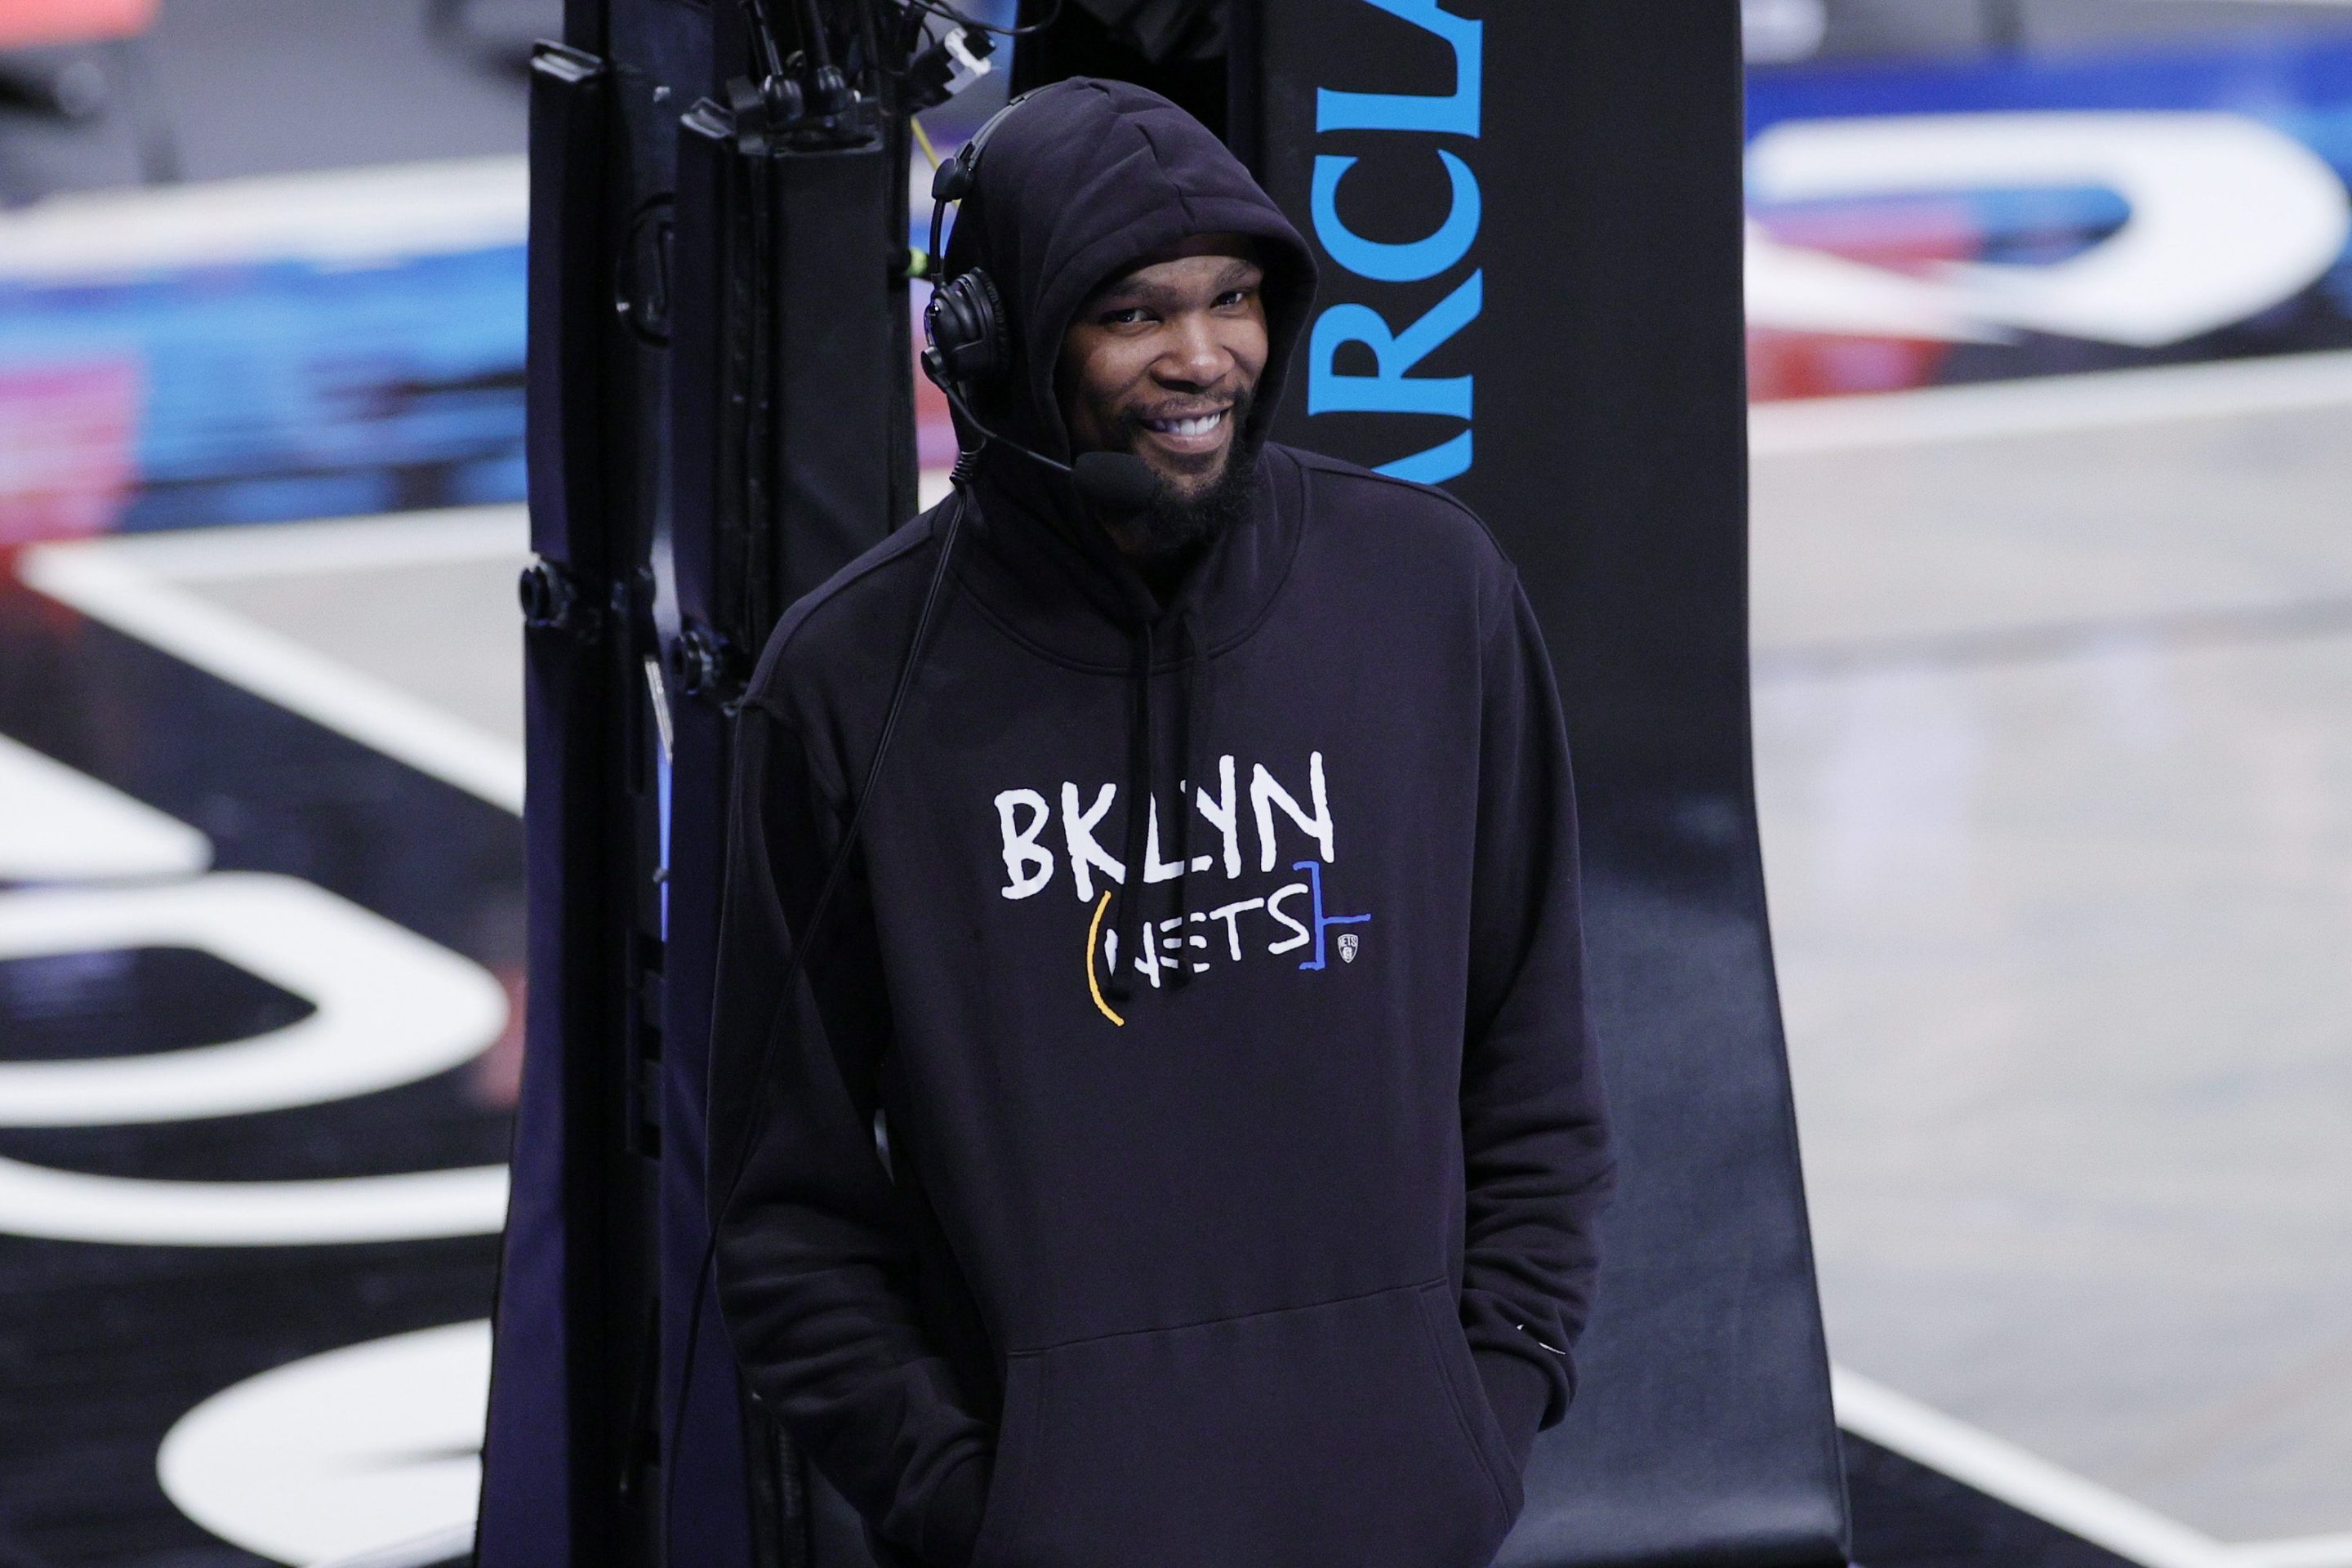 Kevin Durant of the Brooklyn Nets, in a hoodie, making a goofus face